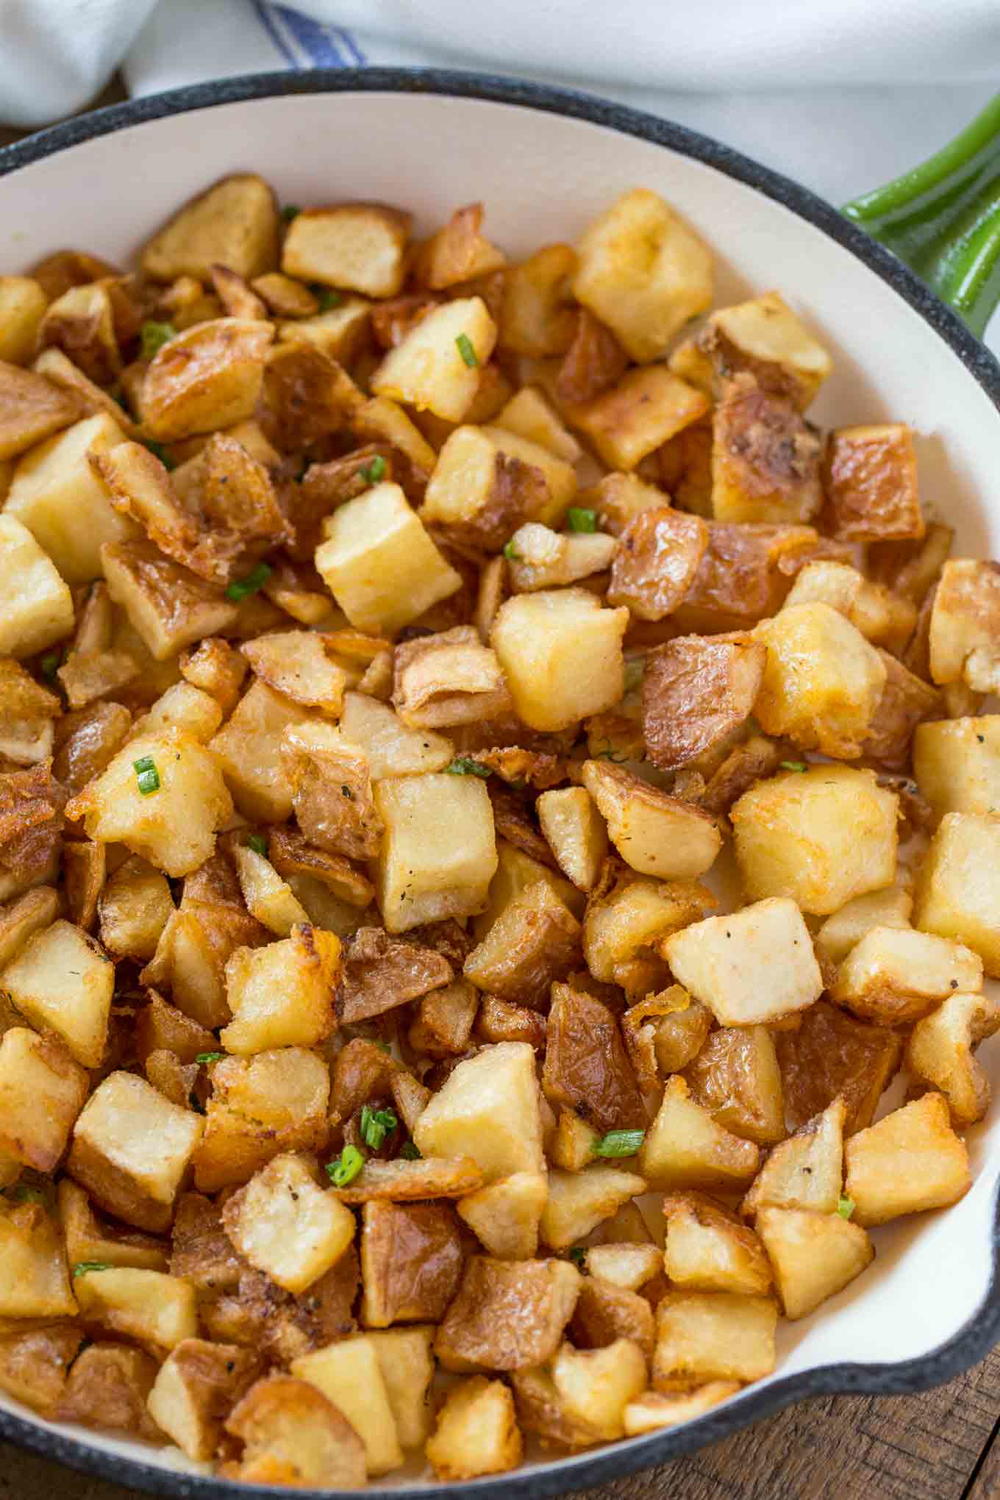 how to make cubed hash browns from real potatoes